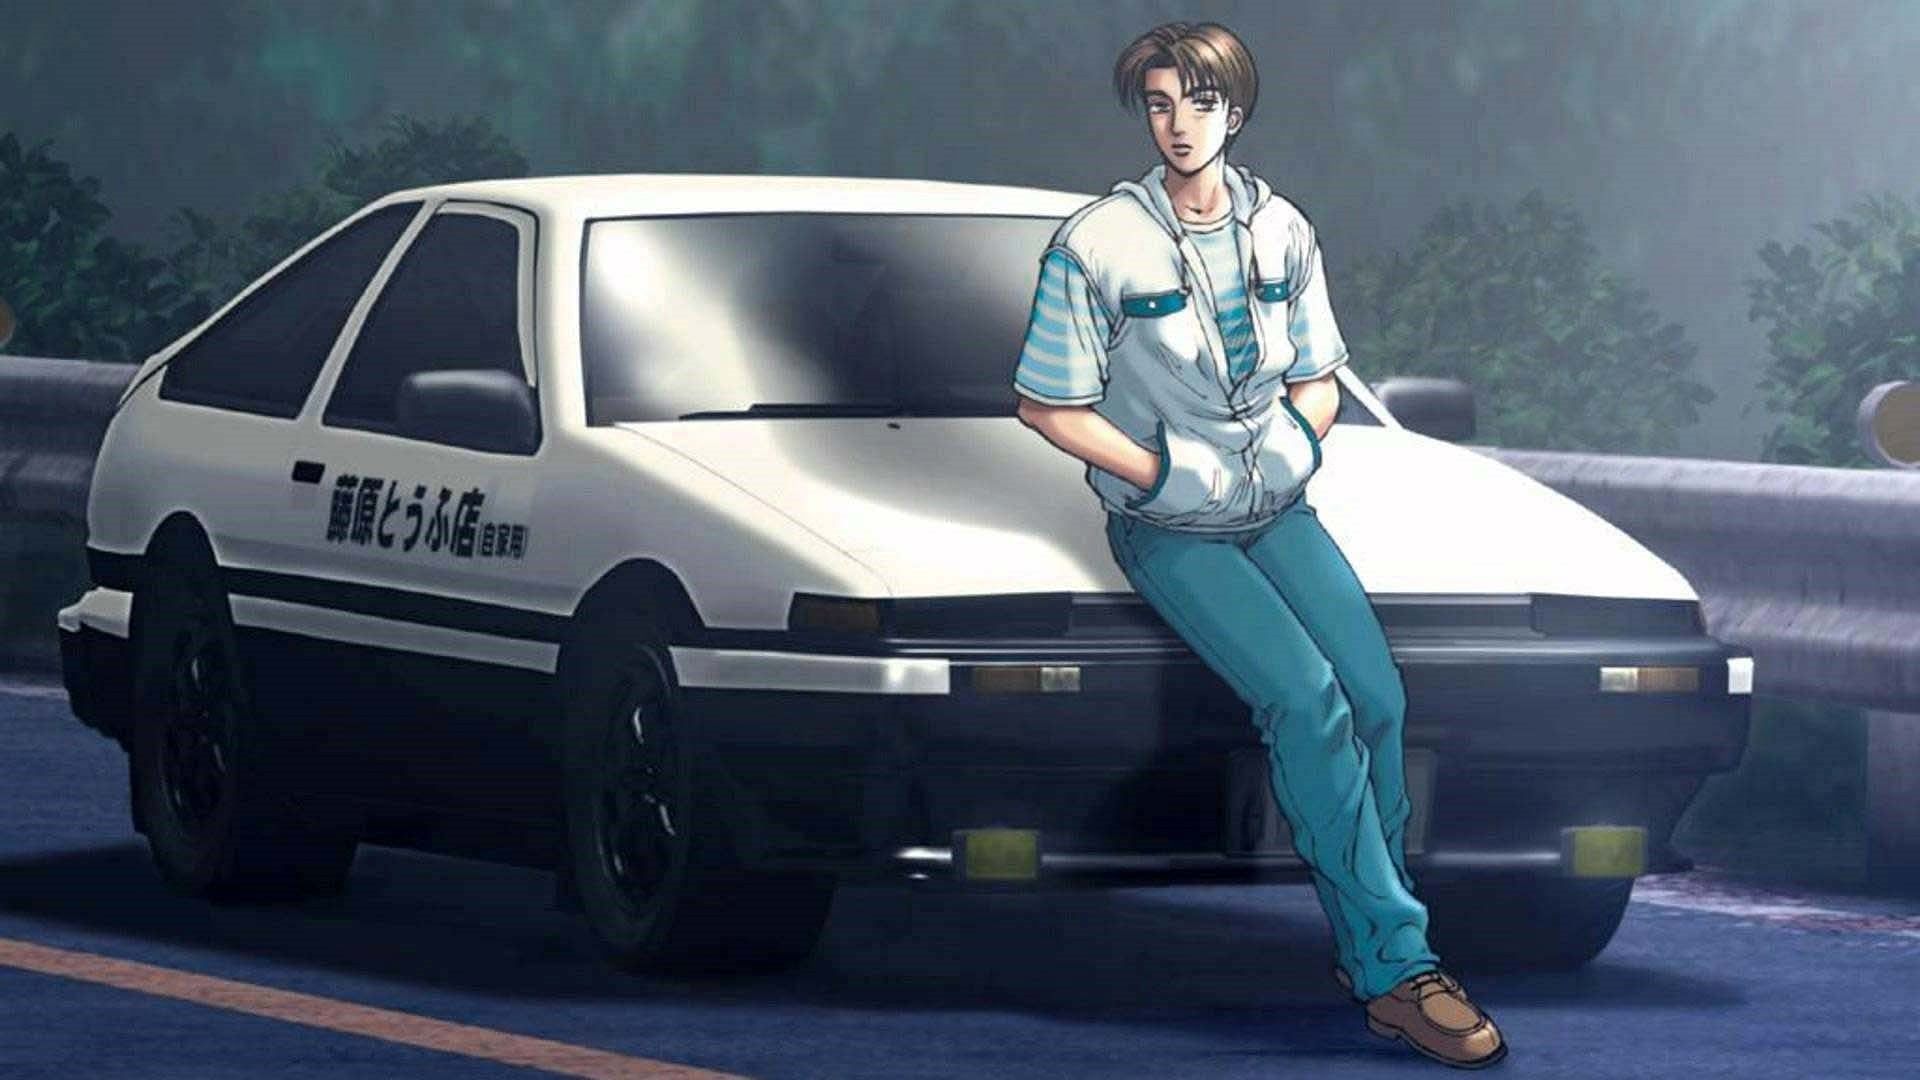 Initial D in real life : r/Animemes